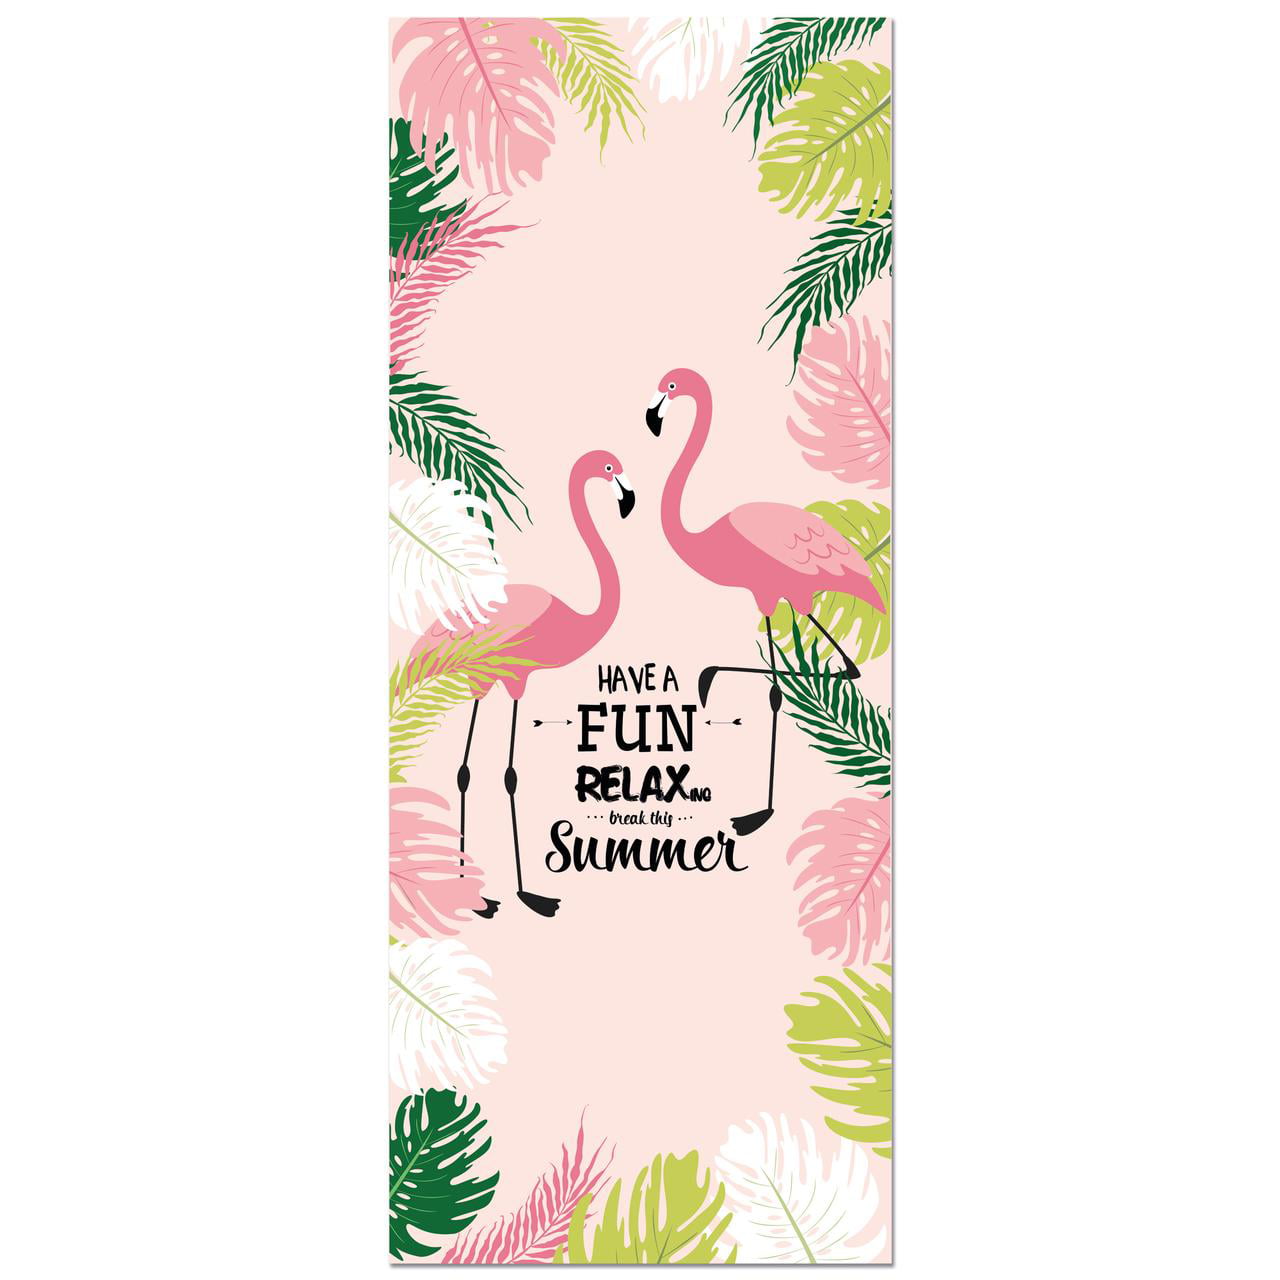 Relaxing with Flamingos 8 square fabric art panel